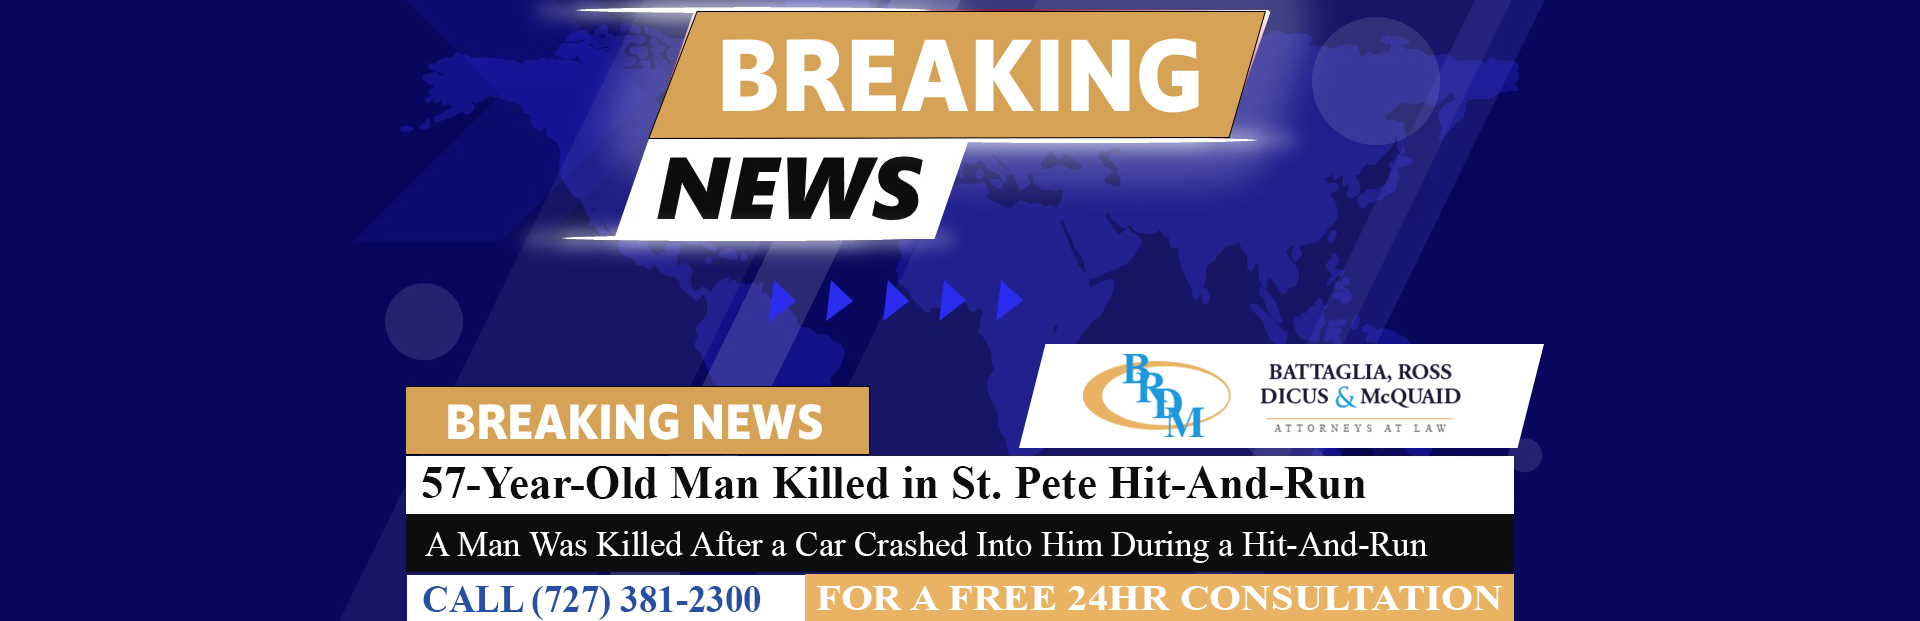 [05-15-23] 57-Year-Old Man Killed in St. Pete Hit-And-Run